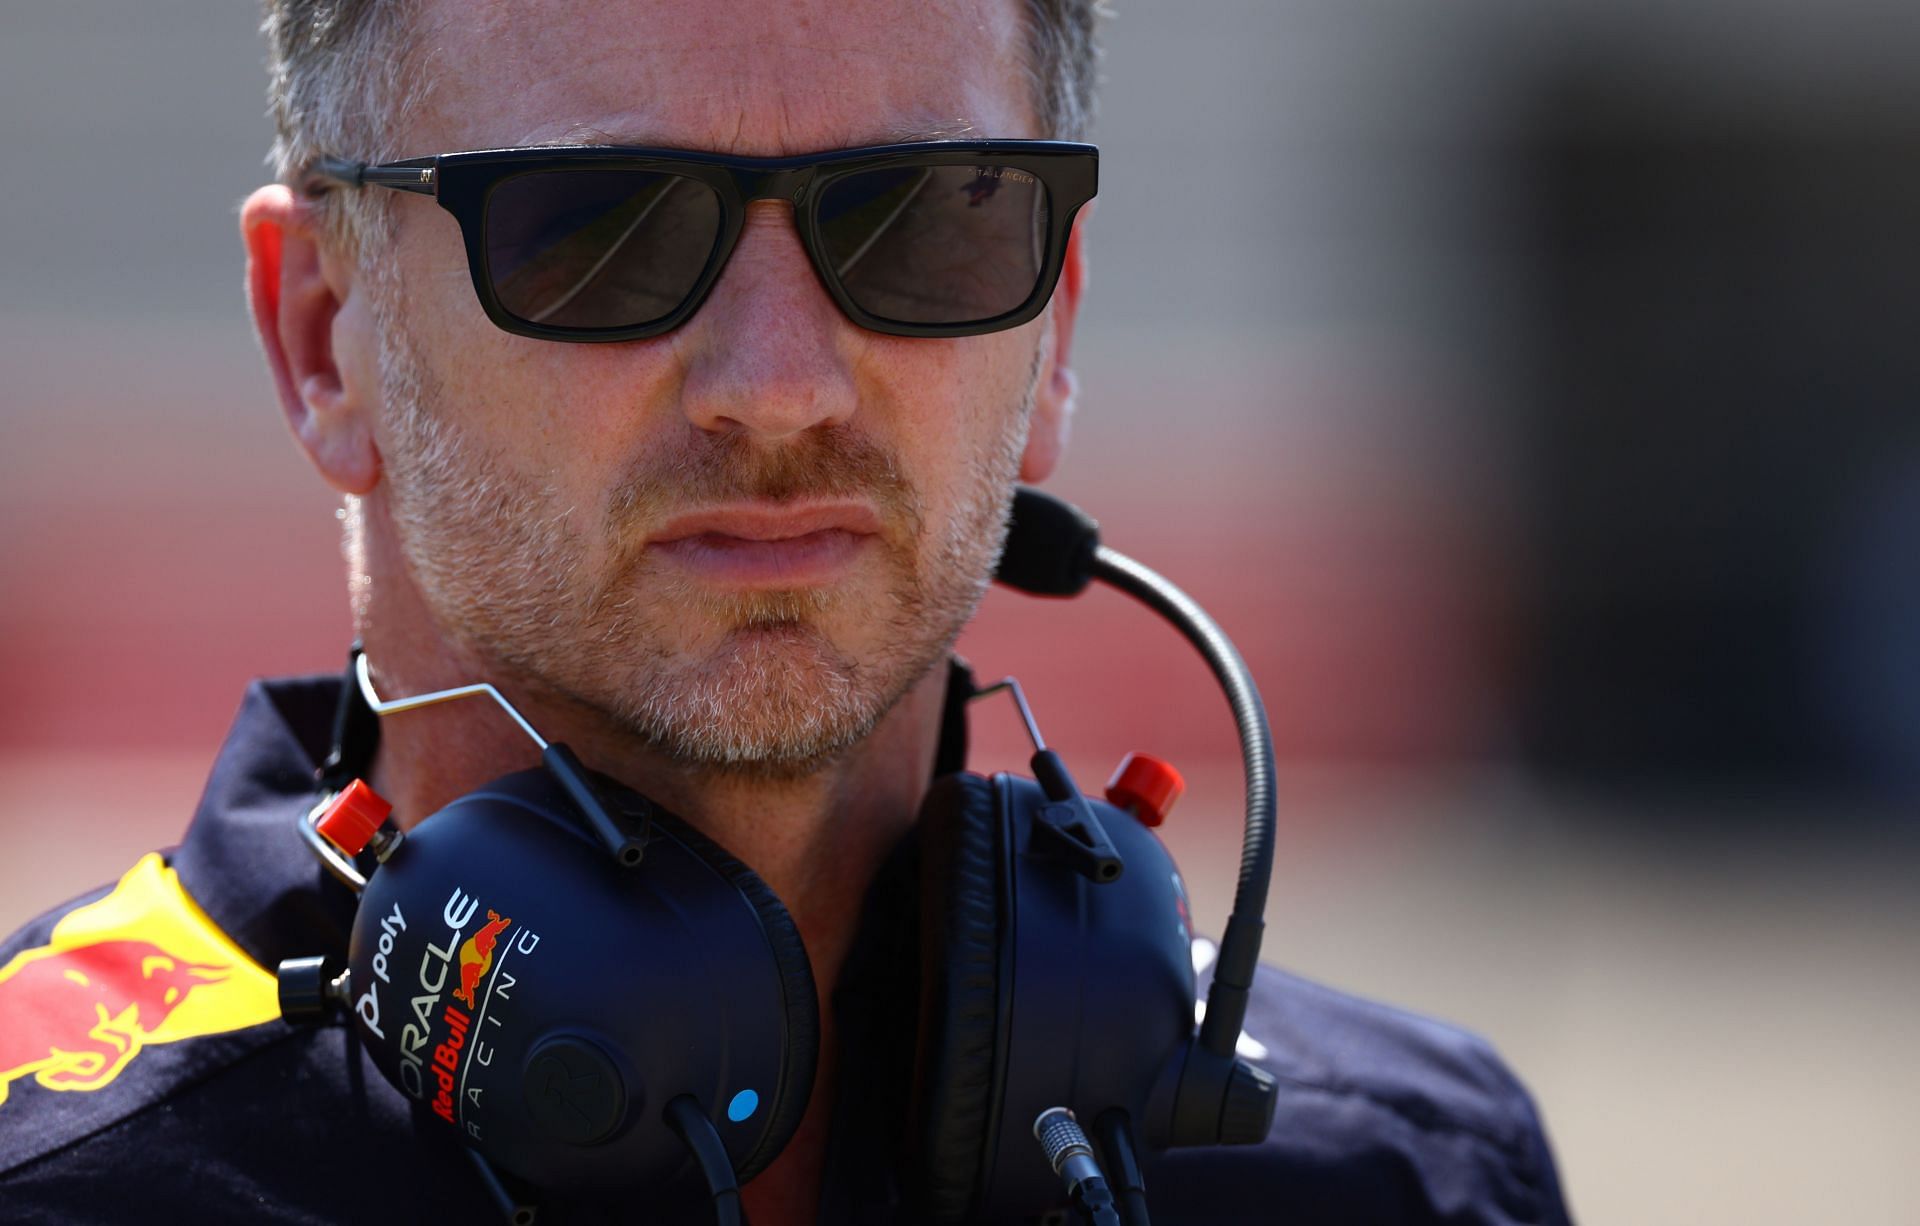 Red Bull Racing Team Principal Christian Horner looks on from the pitlane during practice ahead of the F1 Grand Prix of France at Circuit Paul Ricard on July 22, 2022 in Le Castellet, France. (Photo by Mark Thompson/Getty Images)